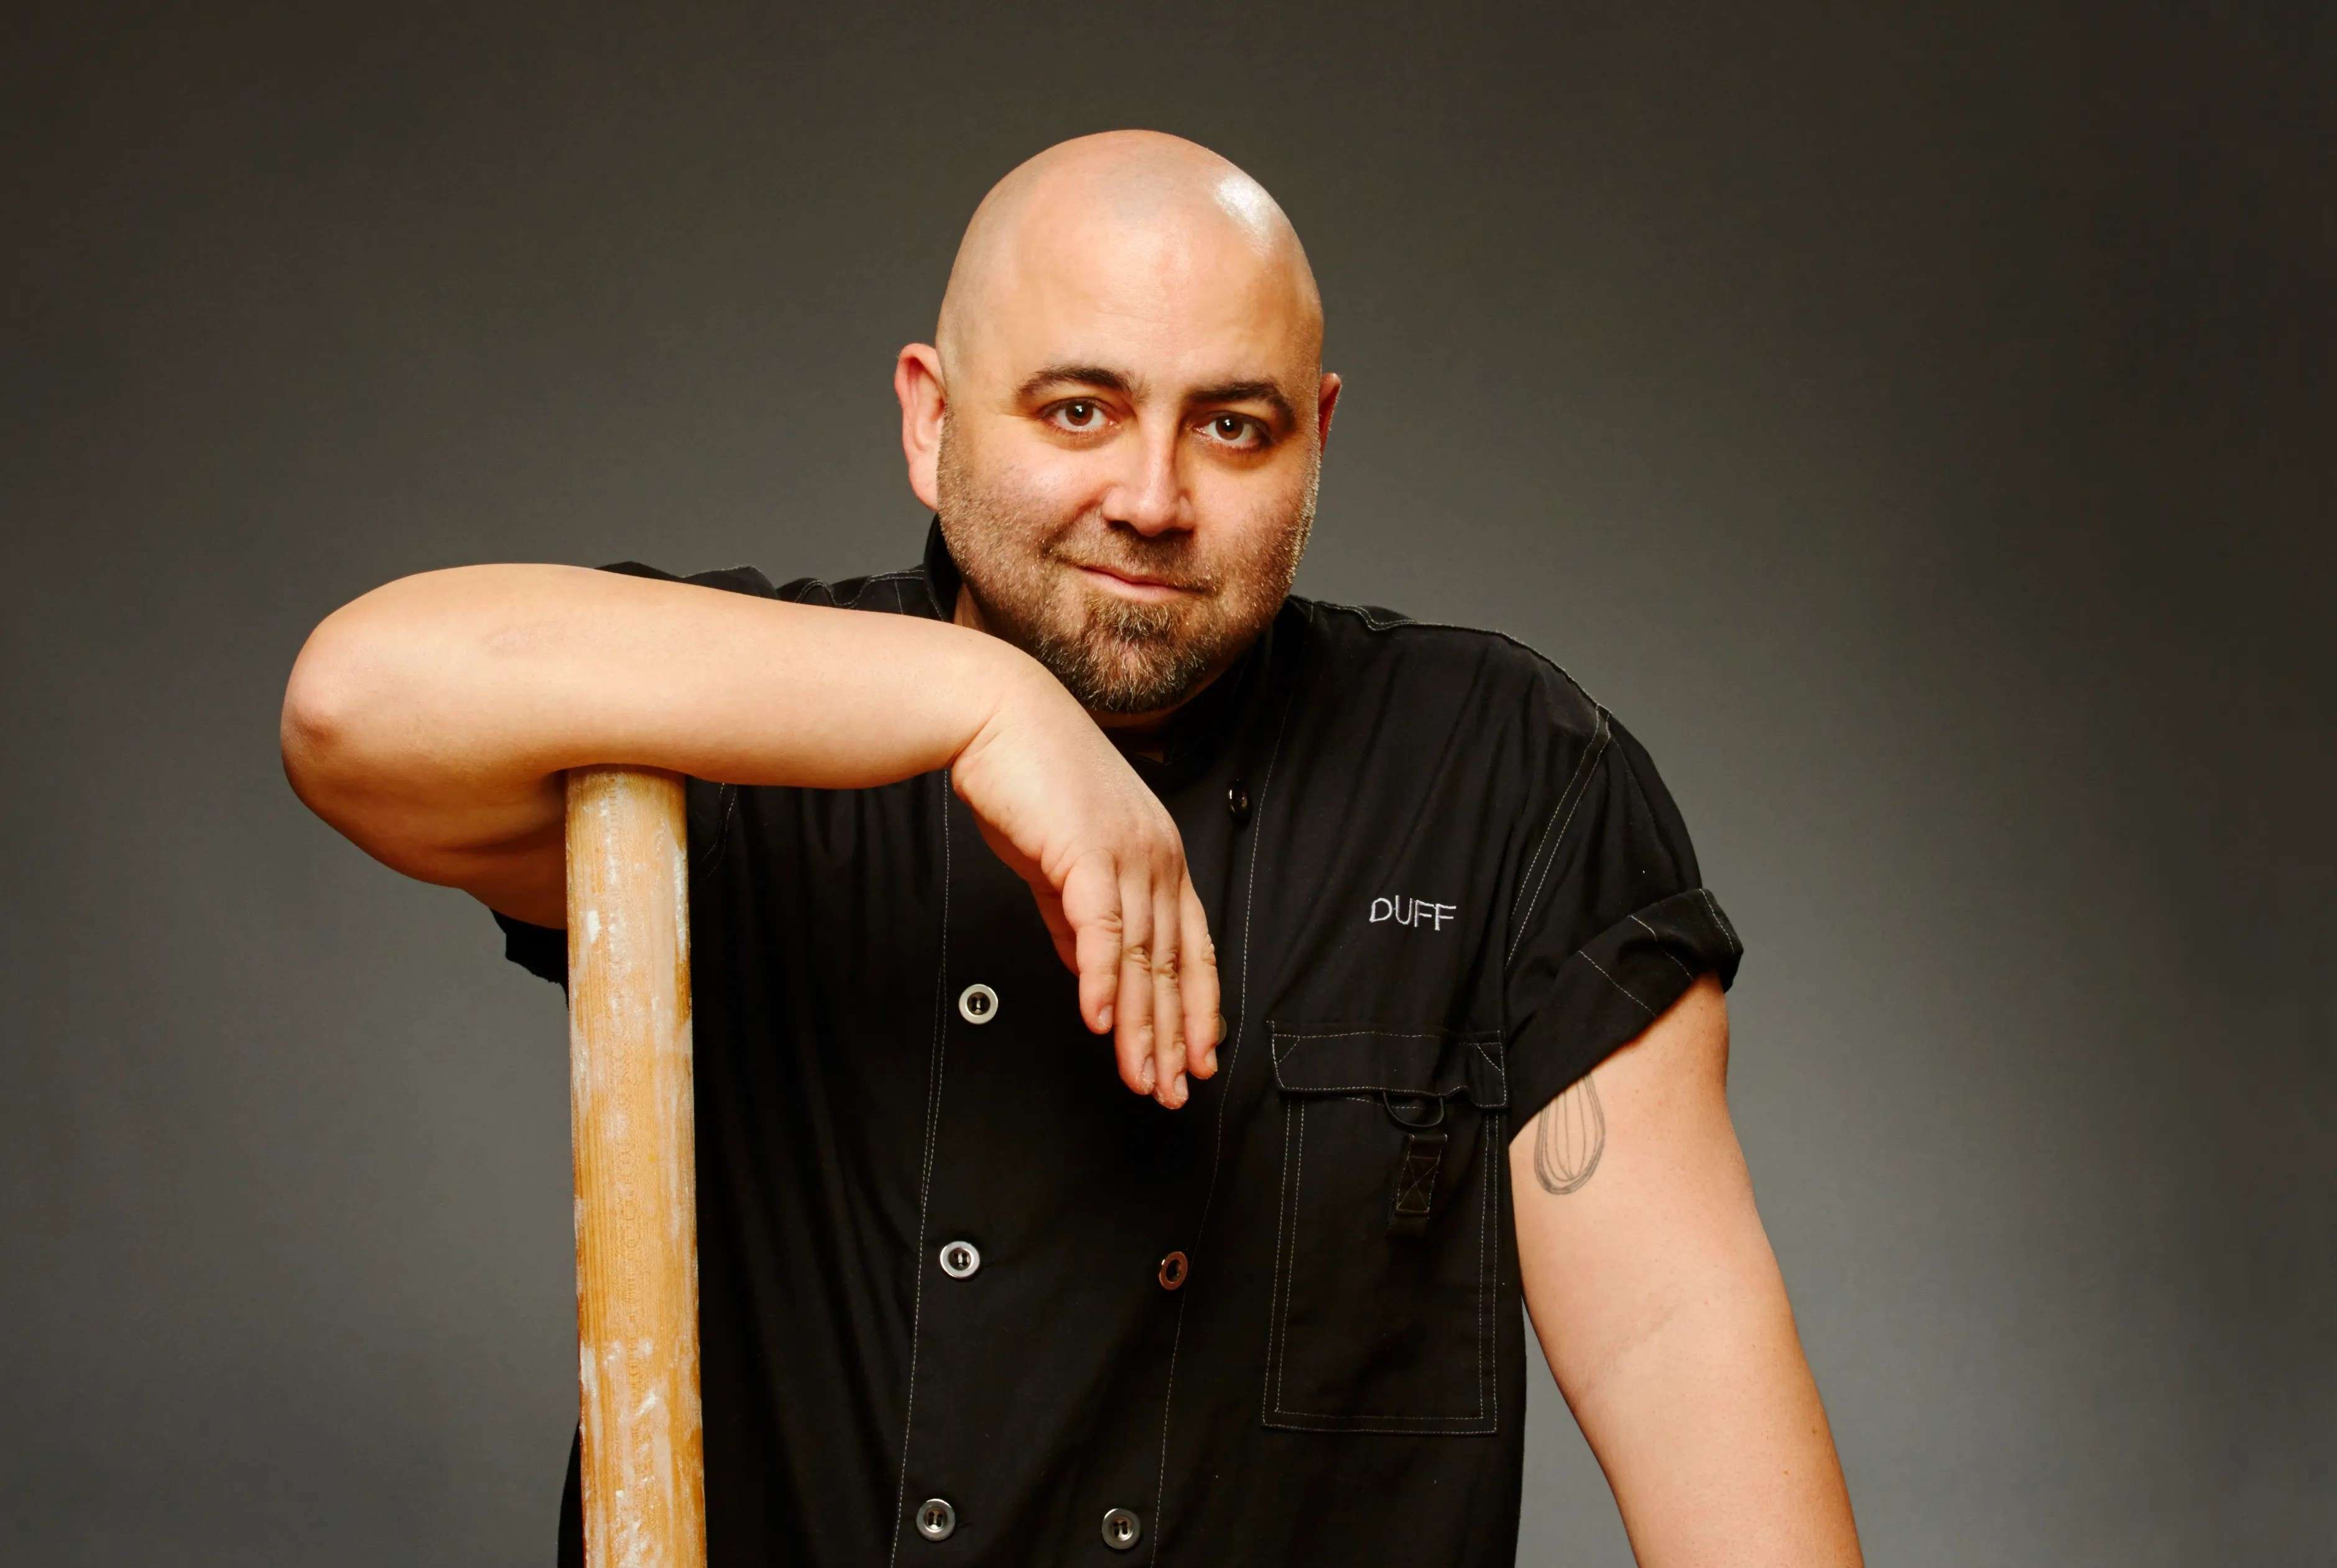 9-fascinating-facts-about-duff-goldman